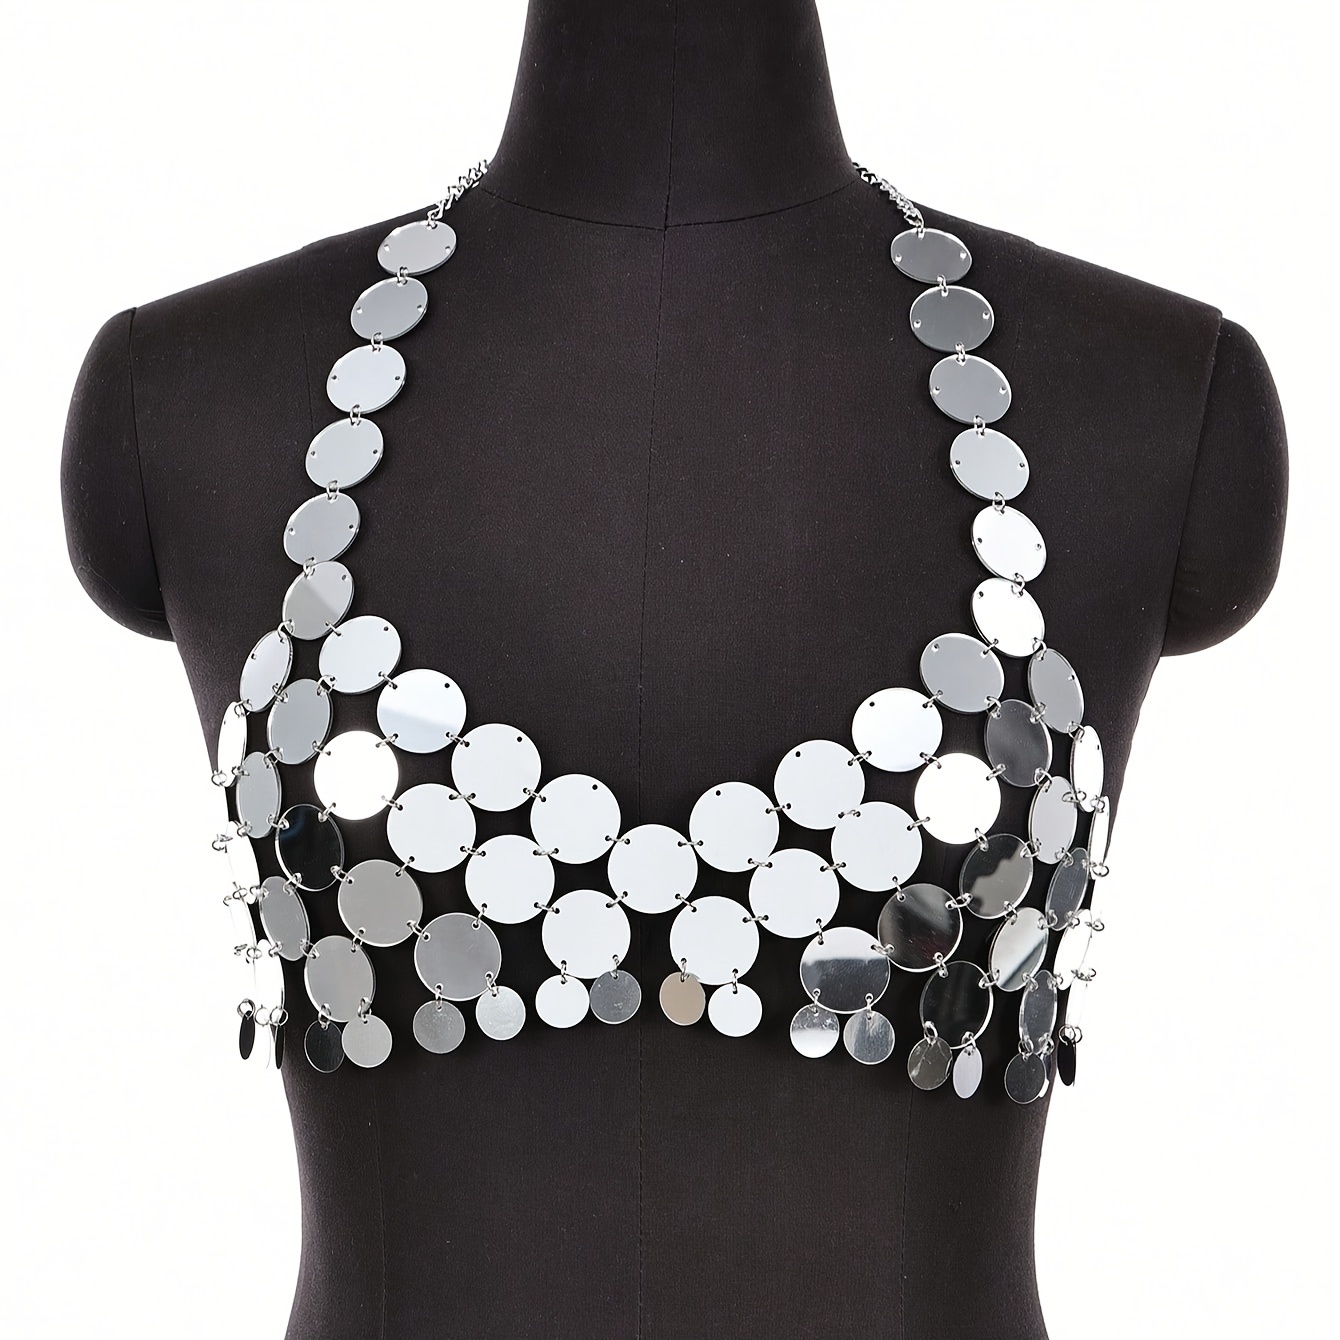 Evild Rhinestone Crop Top Silver Sparkly Party Body Chain Glitter Crystal  Bra Jewelry Adjustable Backless Chest Club Rave Jewelry for Women and Girls